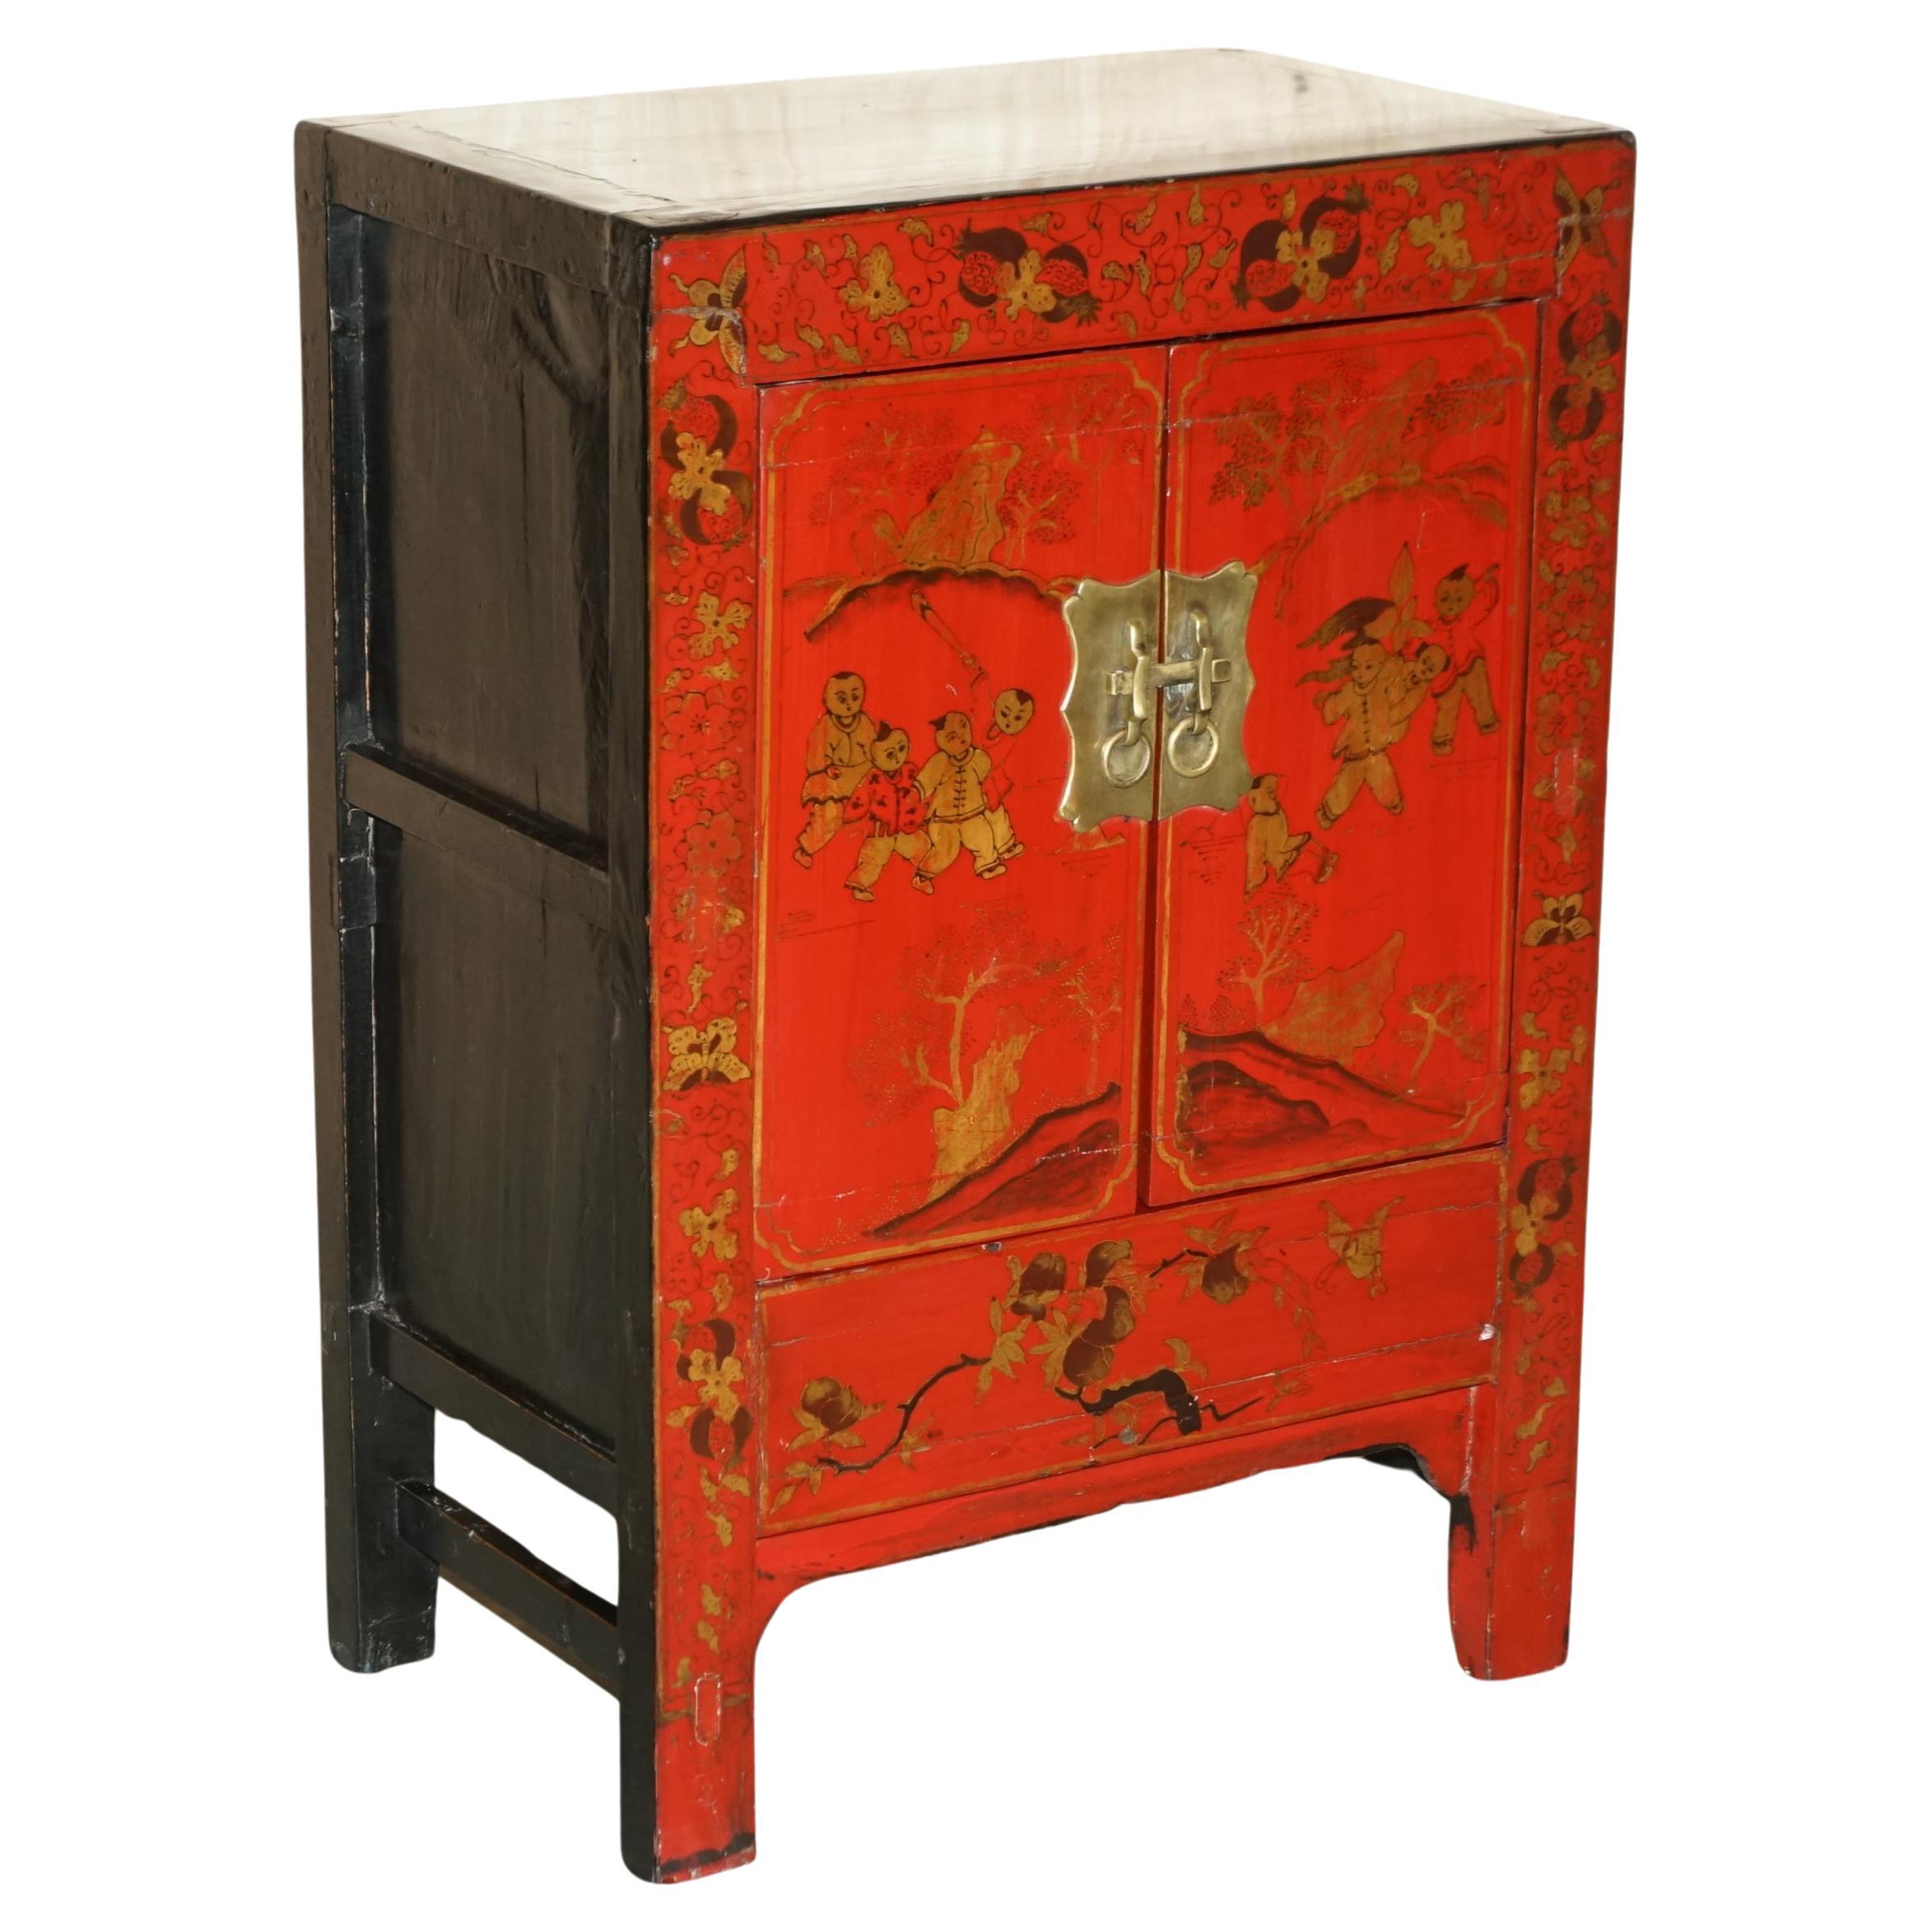 FINE ORIENTAL ANTIQUE CHINESE HAND PAINTED LACQUERED LARGE SiDE TABLE CUPBOARD For Sale